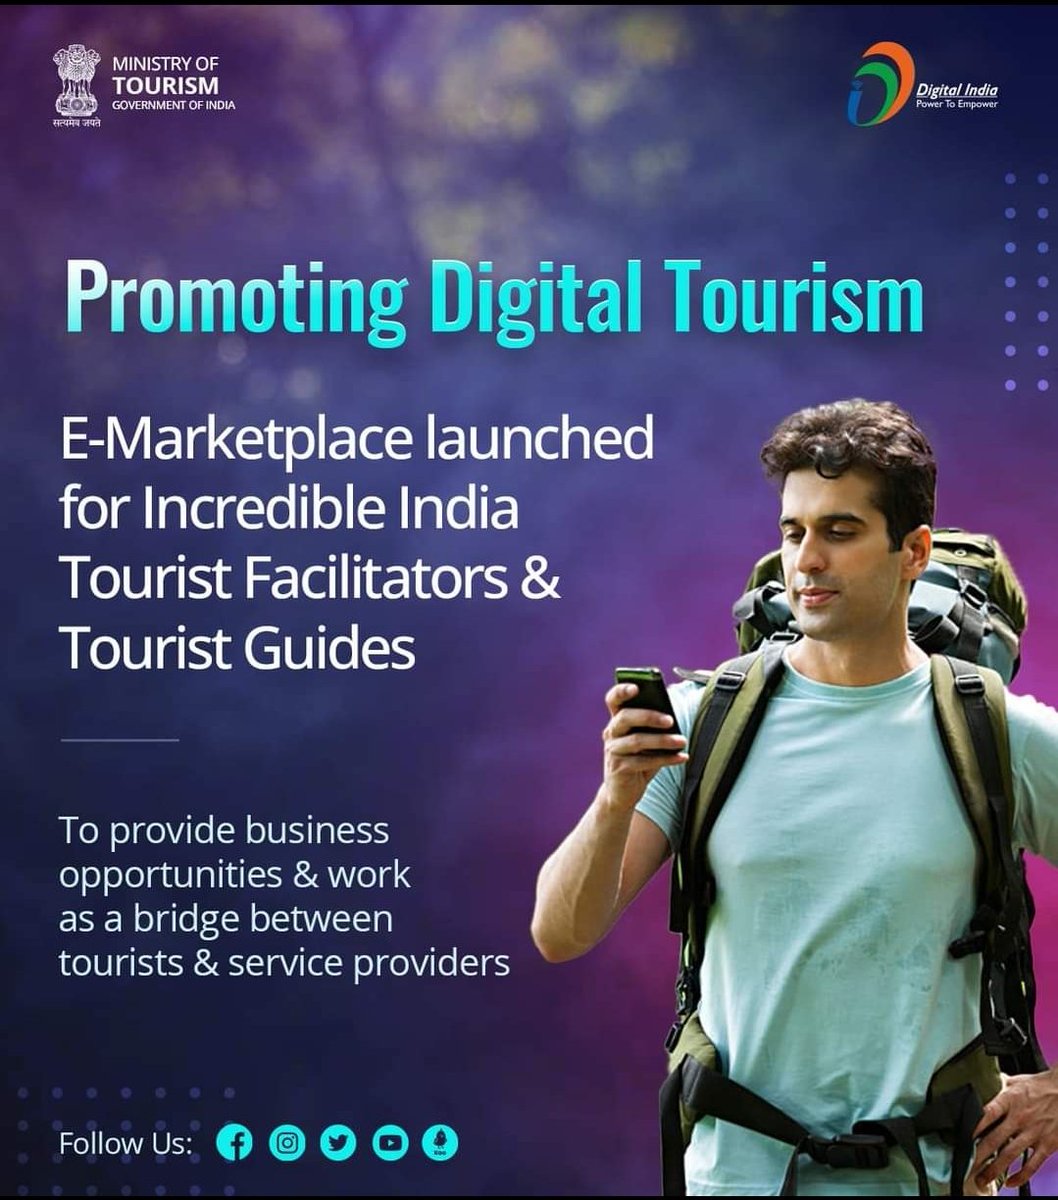 #DigitalTourism has immense #Potential in #generating #employment & #business #opportunities
E-#Marketplace launched by #Govt for #tourist #Guides & #facilitators, which will #work as a #Bridge between them & #tourists 
#IncredibleIndia
#DigitalMarketing
#InfluencerMarketing